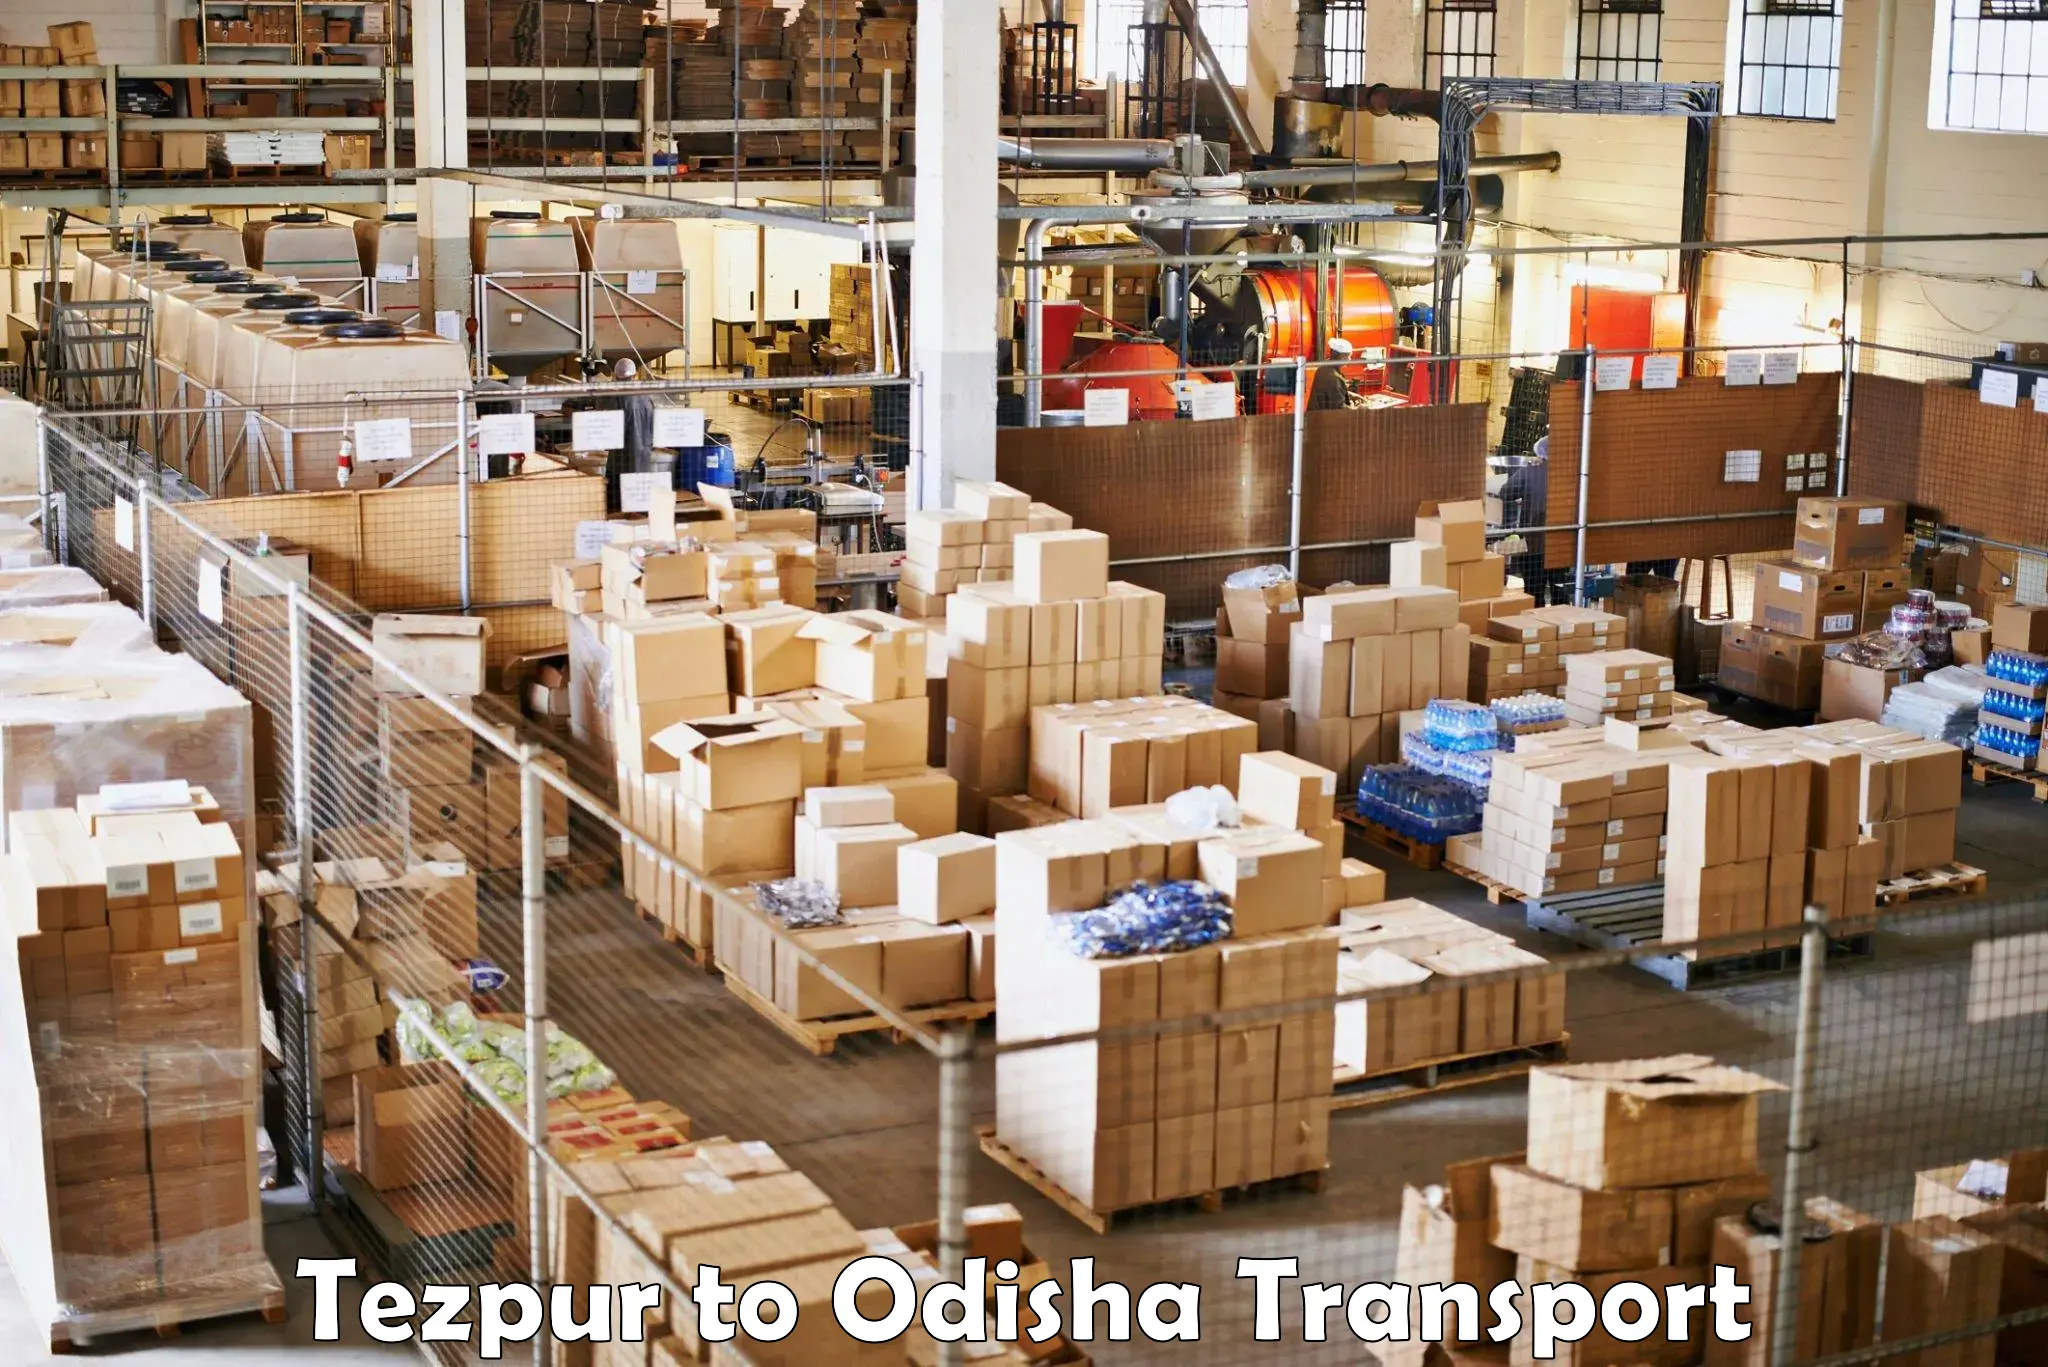 Container transport service Tezpur to Gajapati